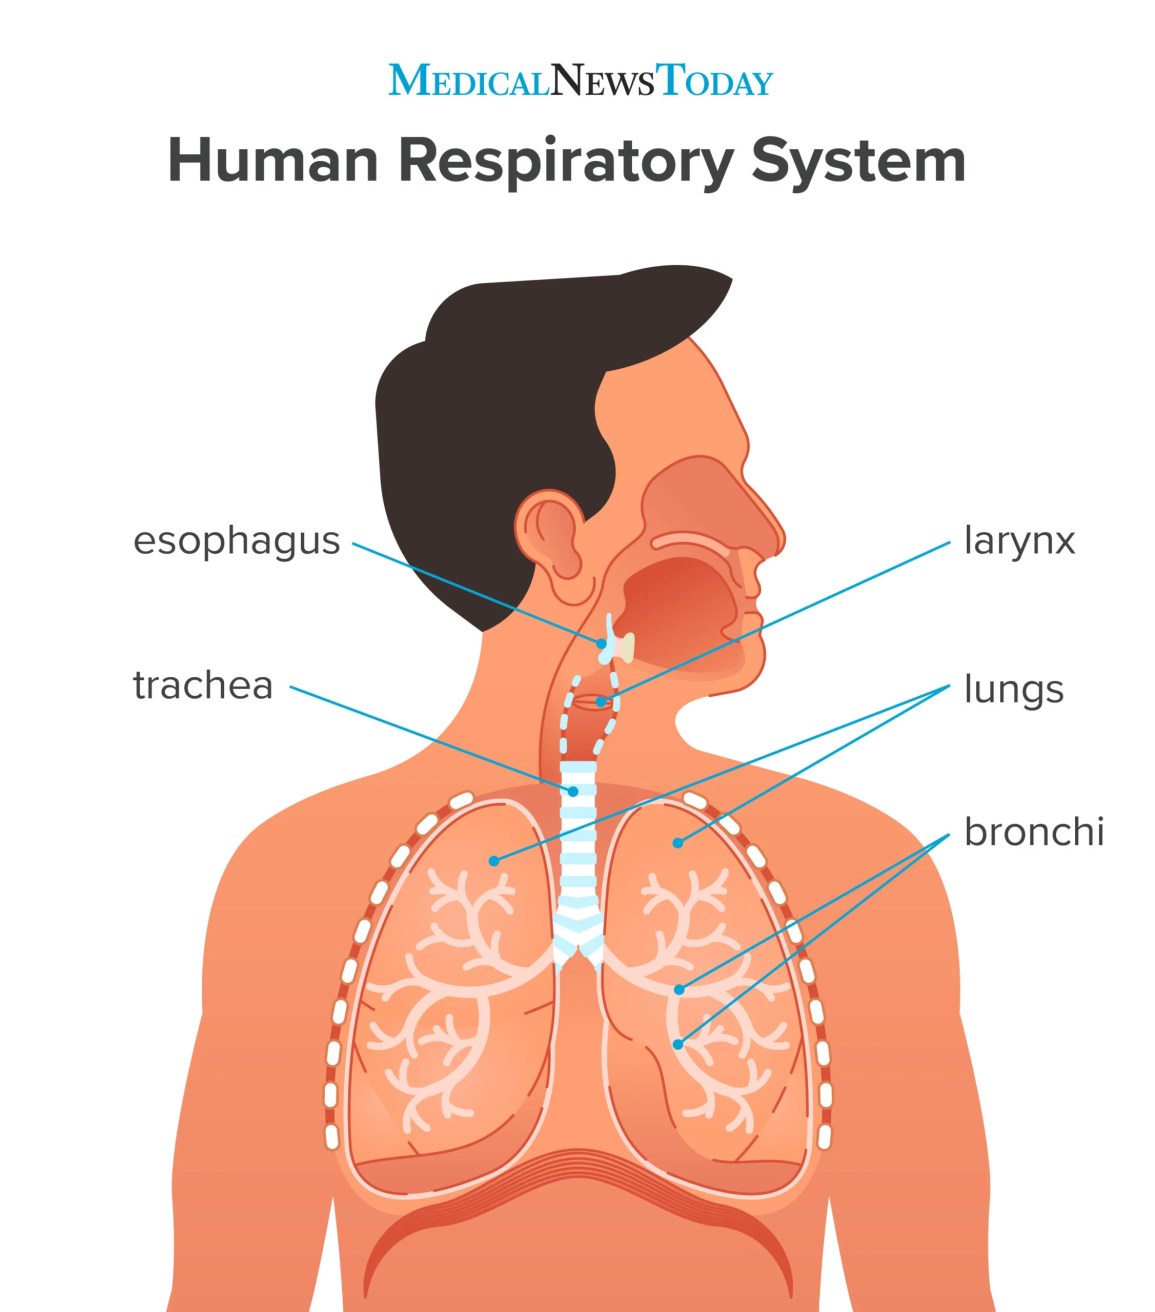 an infographic showing the human respiratory system including the trachea